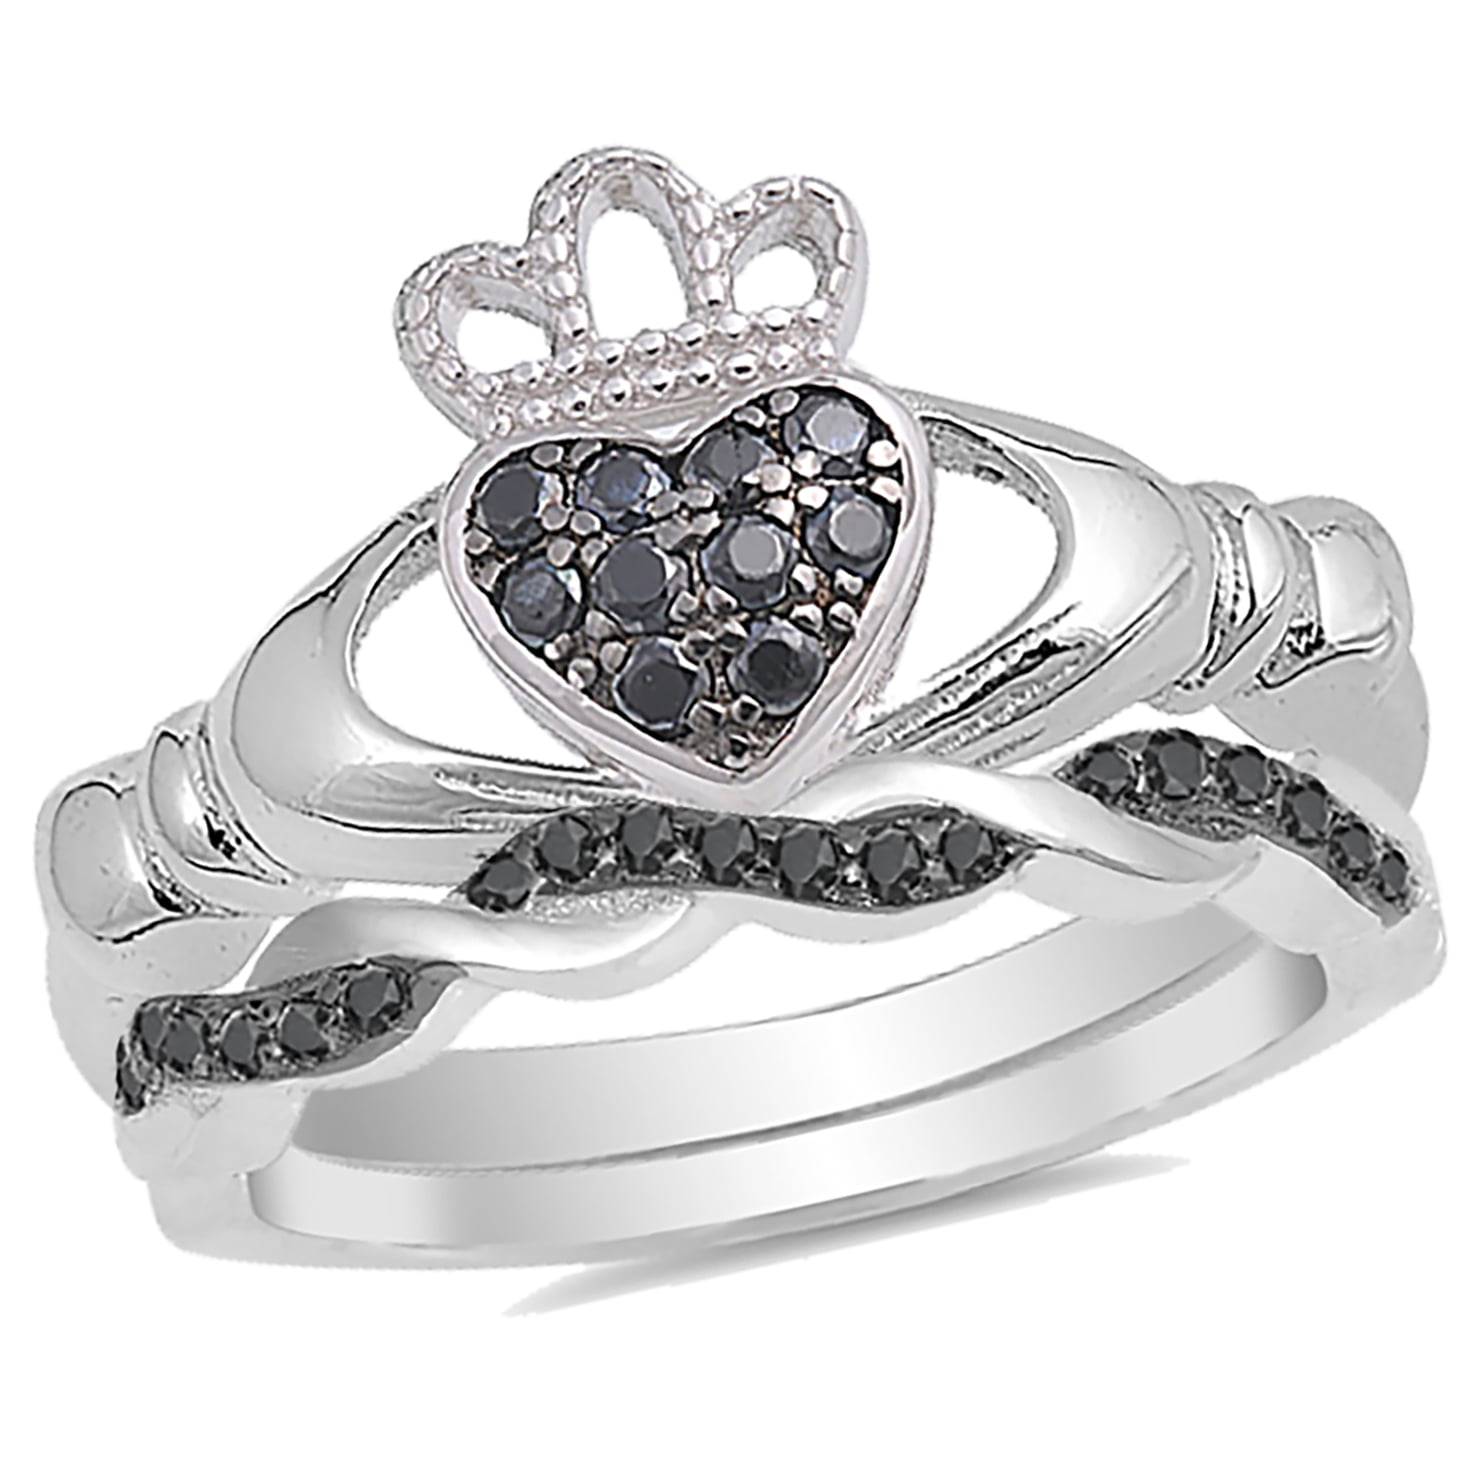 Claddagh Ring .925 Silver Set With a Black Diamond Mirror Finish 